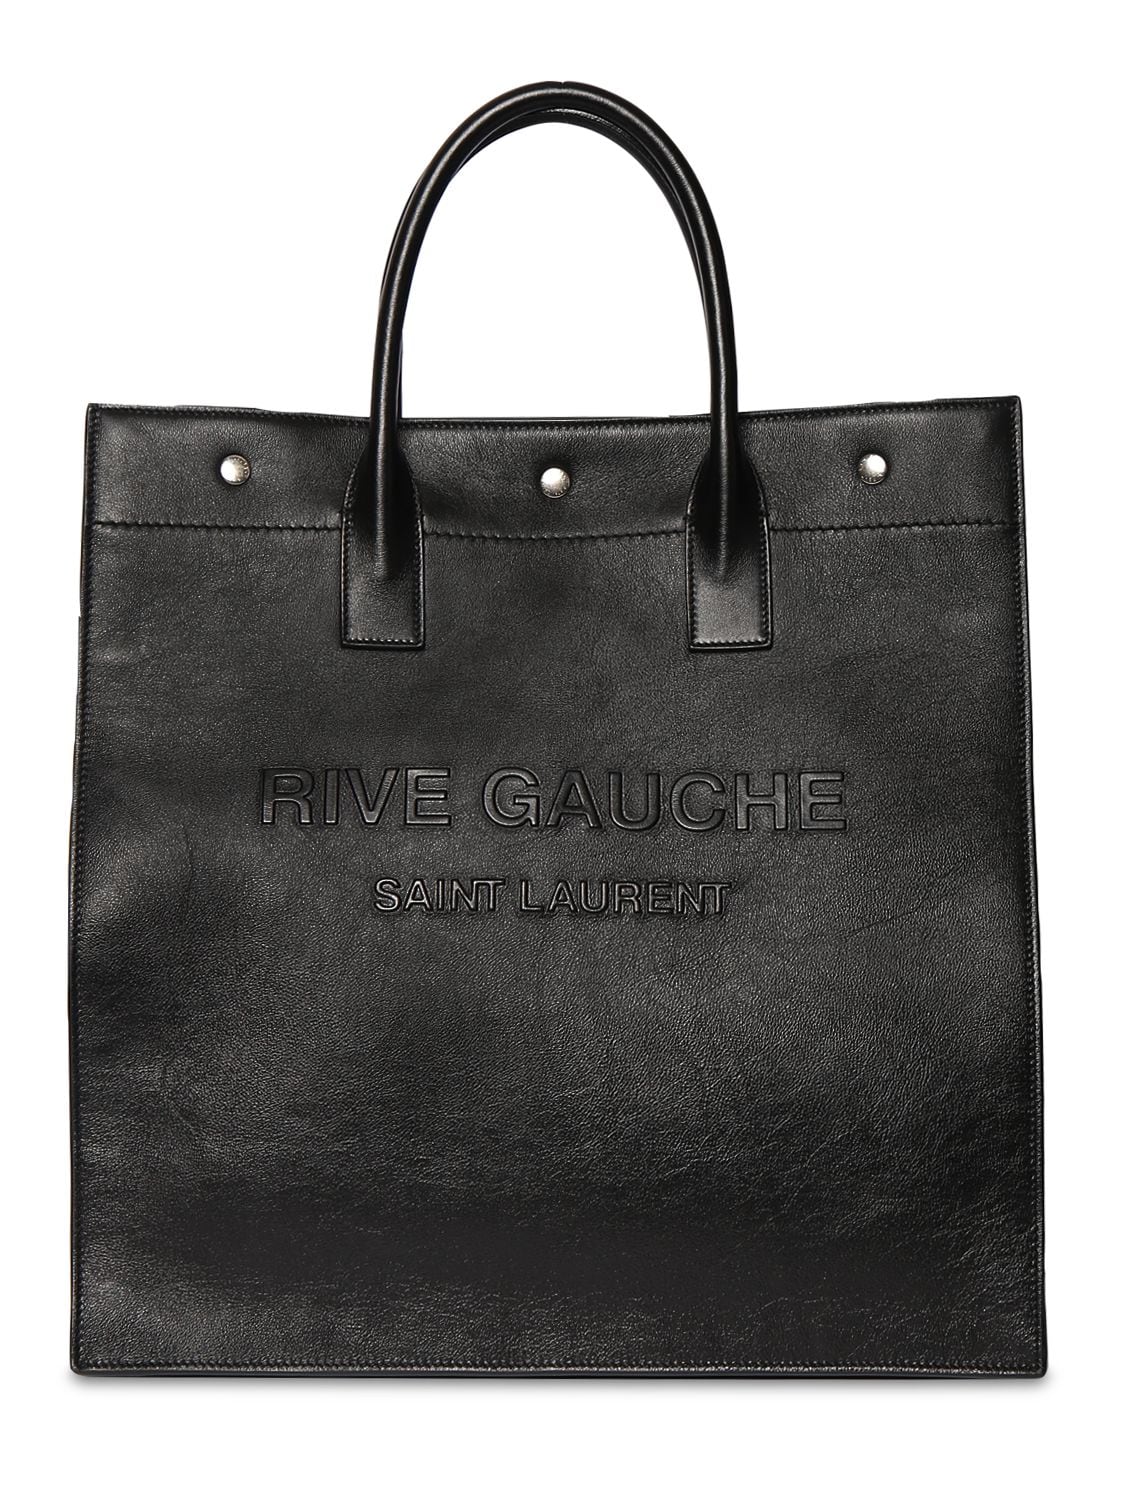 Image of Rive Gauche N/s Leather Tote Bag